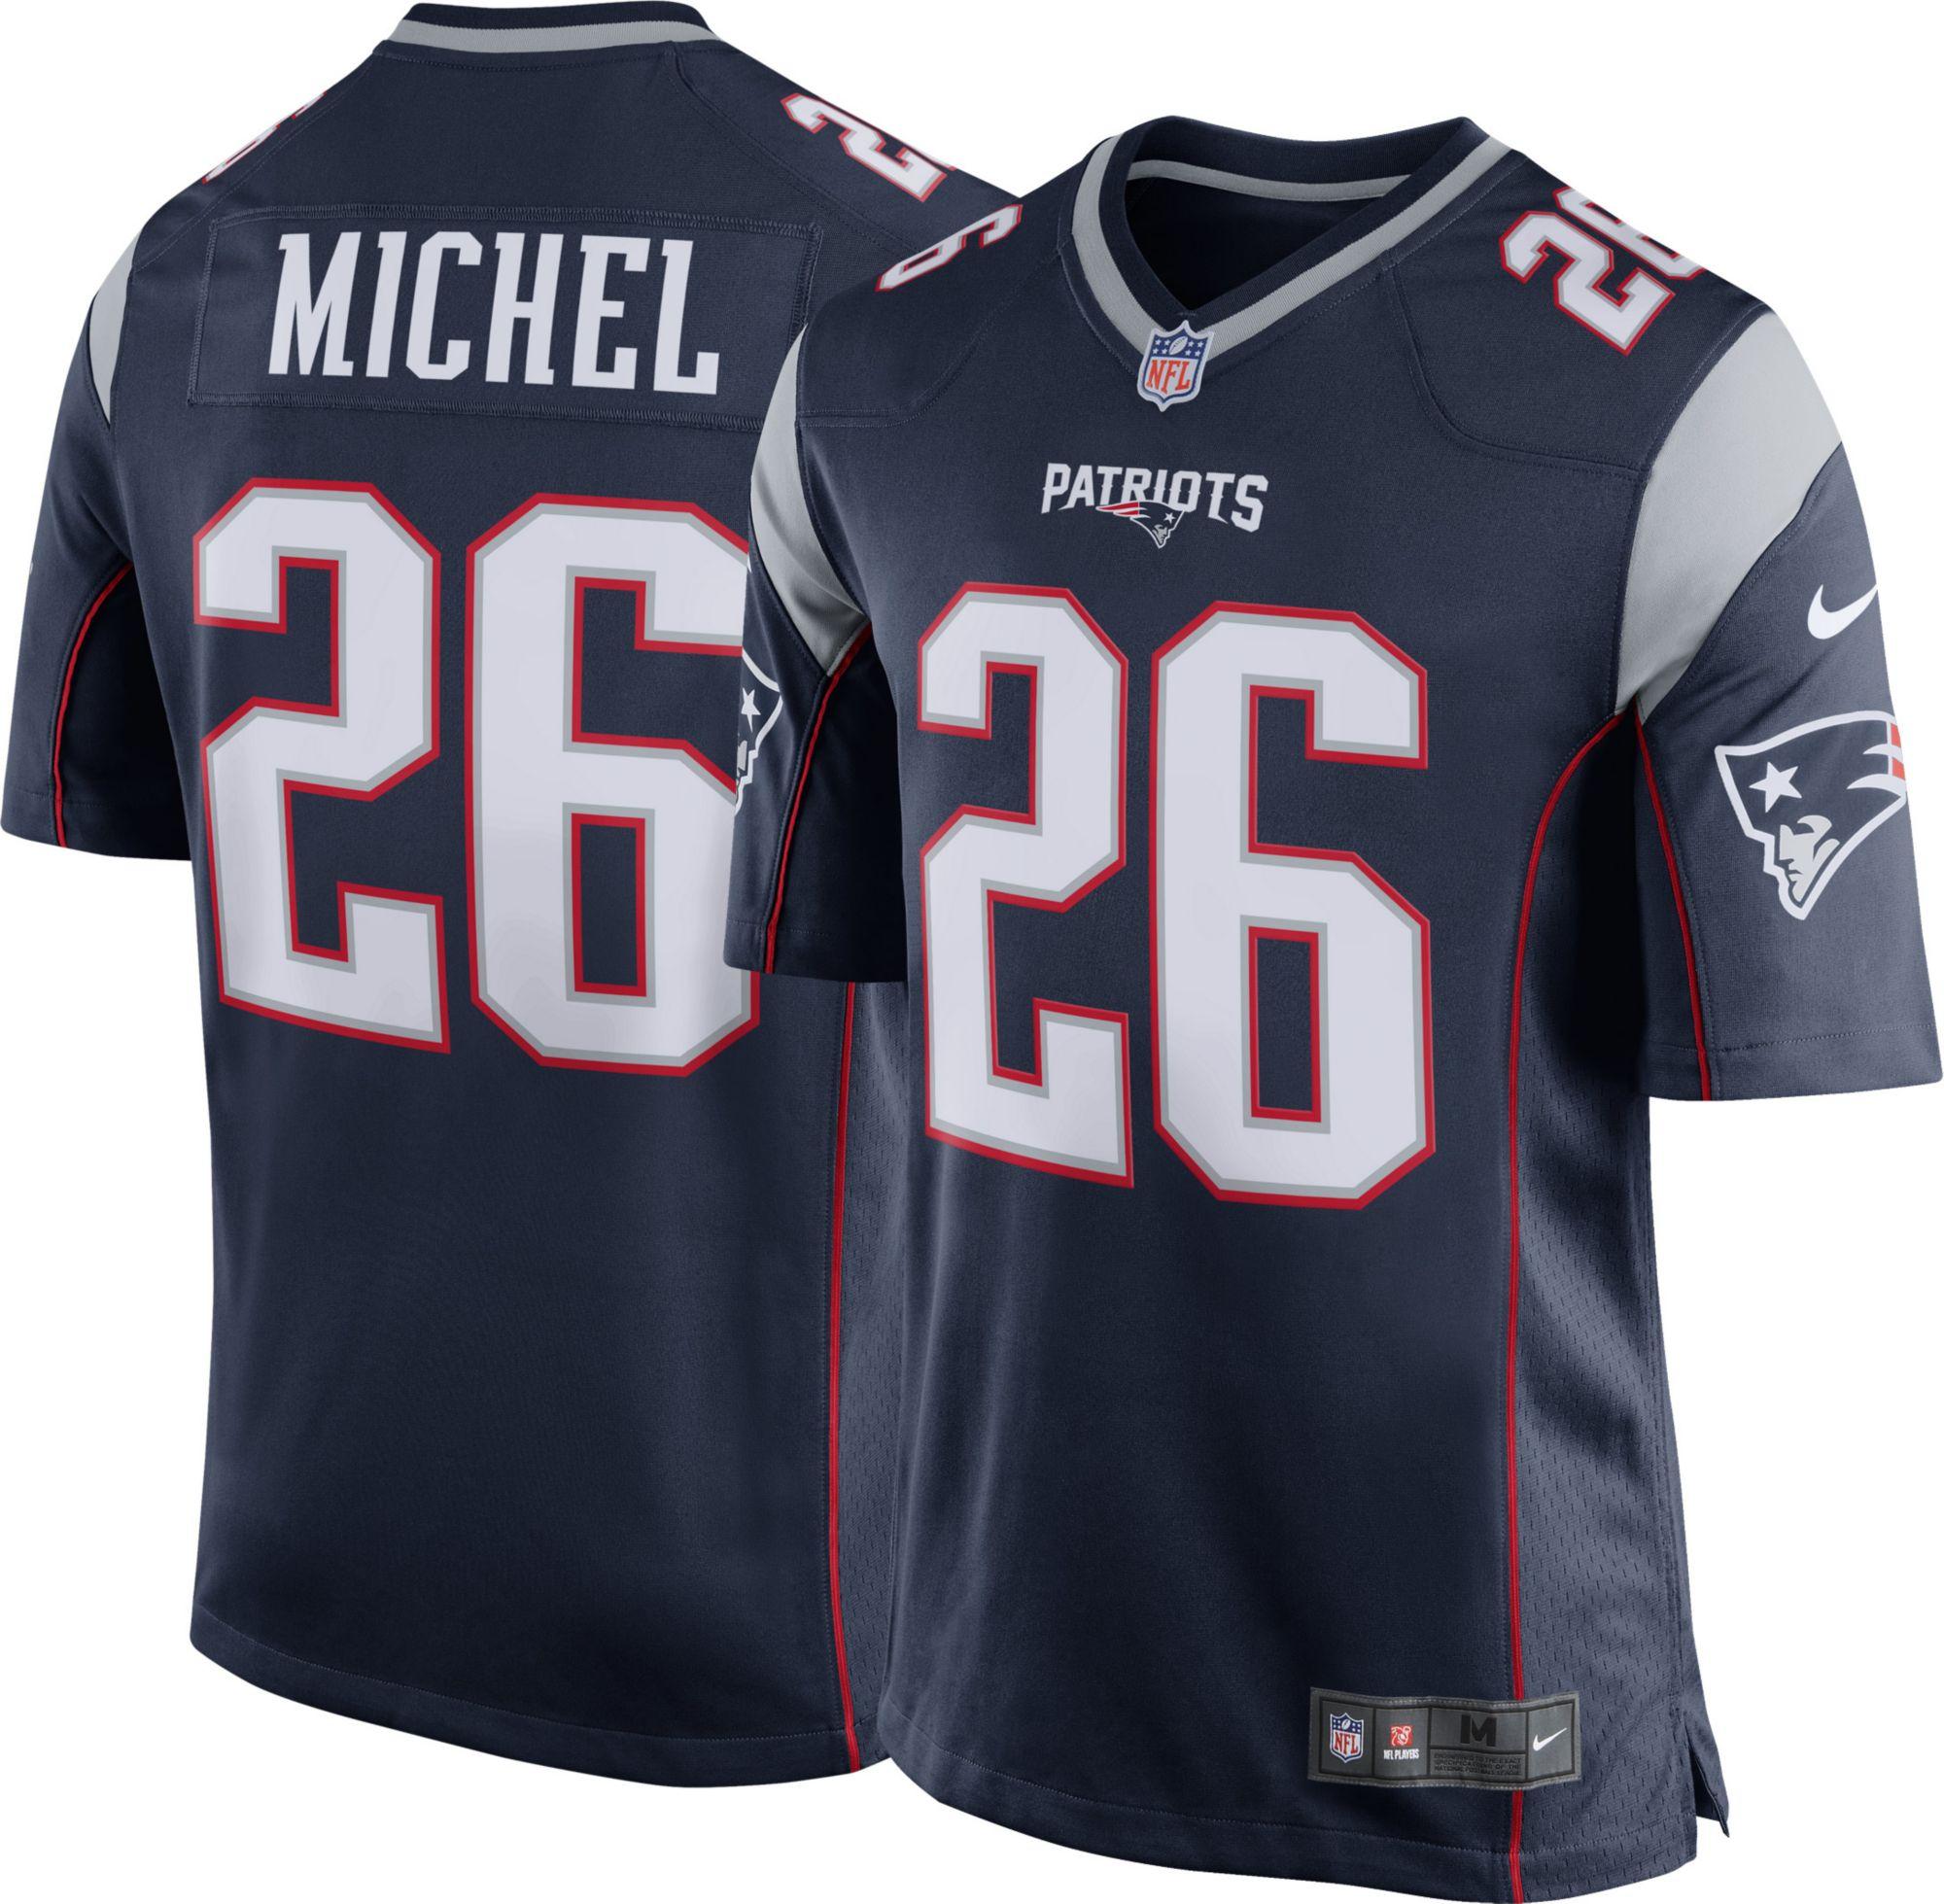 Nike Satin Home Game Jersey New England Patriots Sony Michel #26 in ...